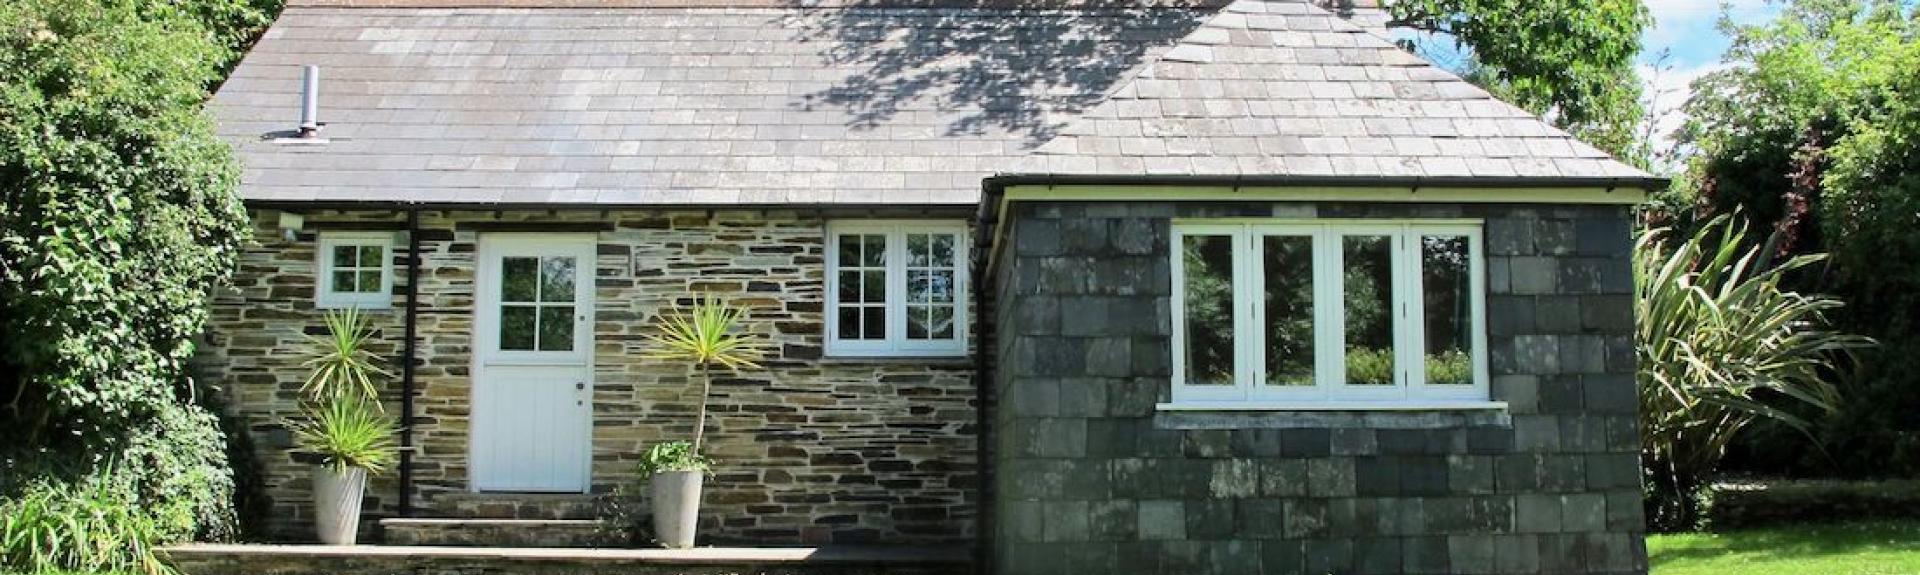 Granite-built exterior of a single storey Cornish holiday home surrounded by lawns.ottage